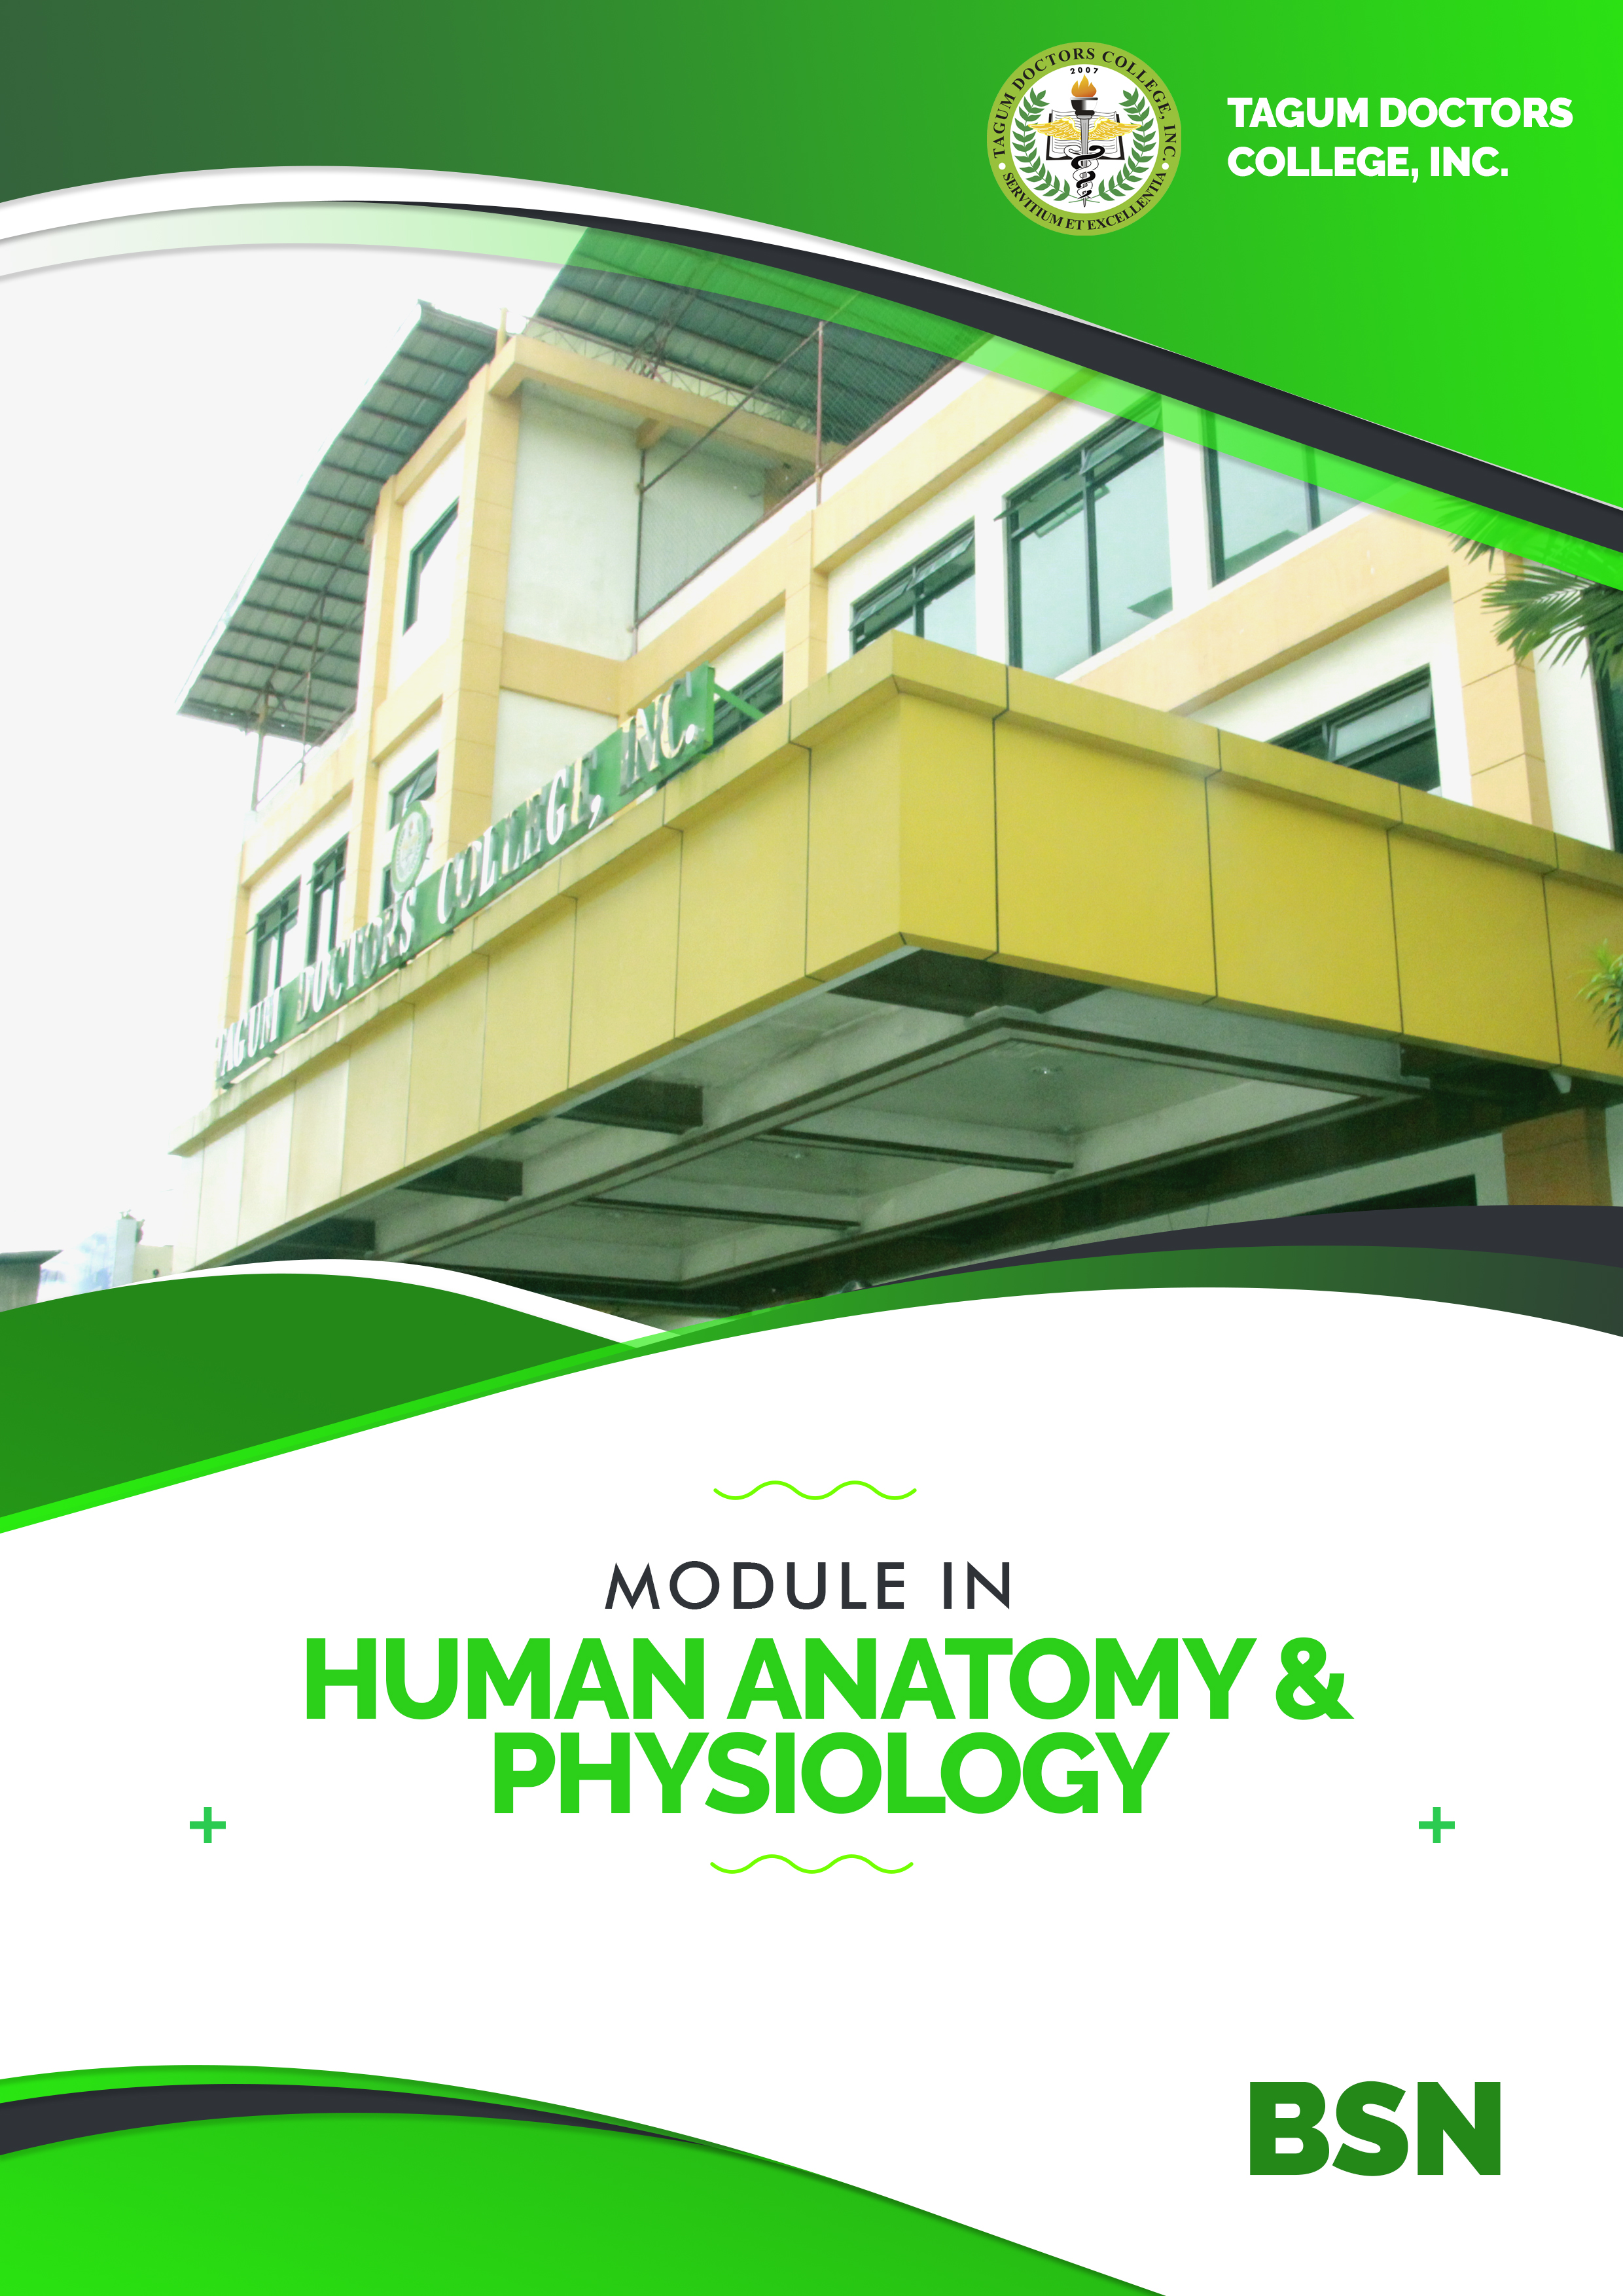 Human Anatomy and Physiology Lec - BSN 1-F